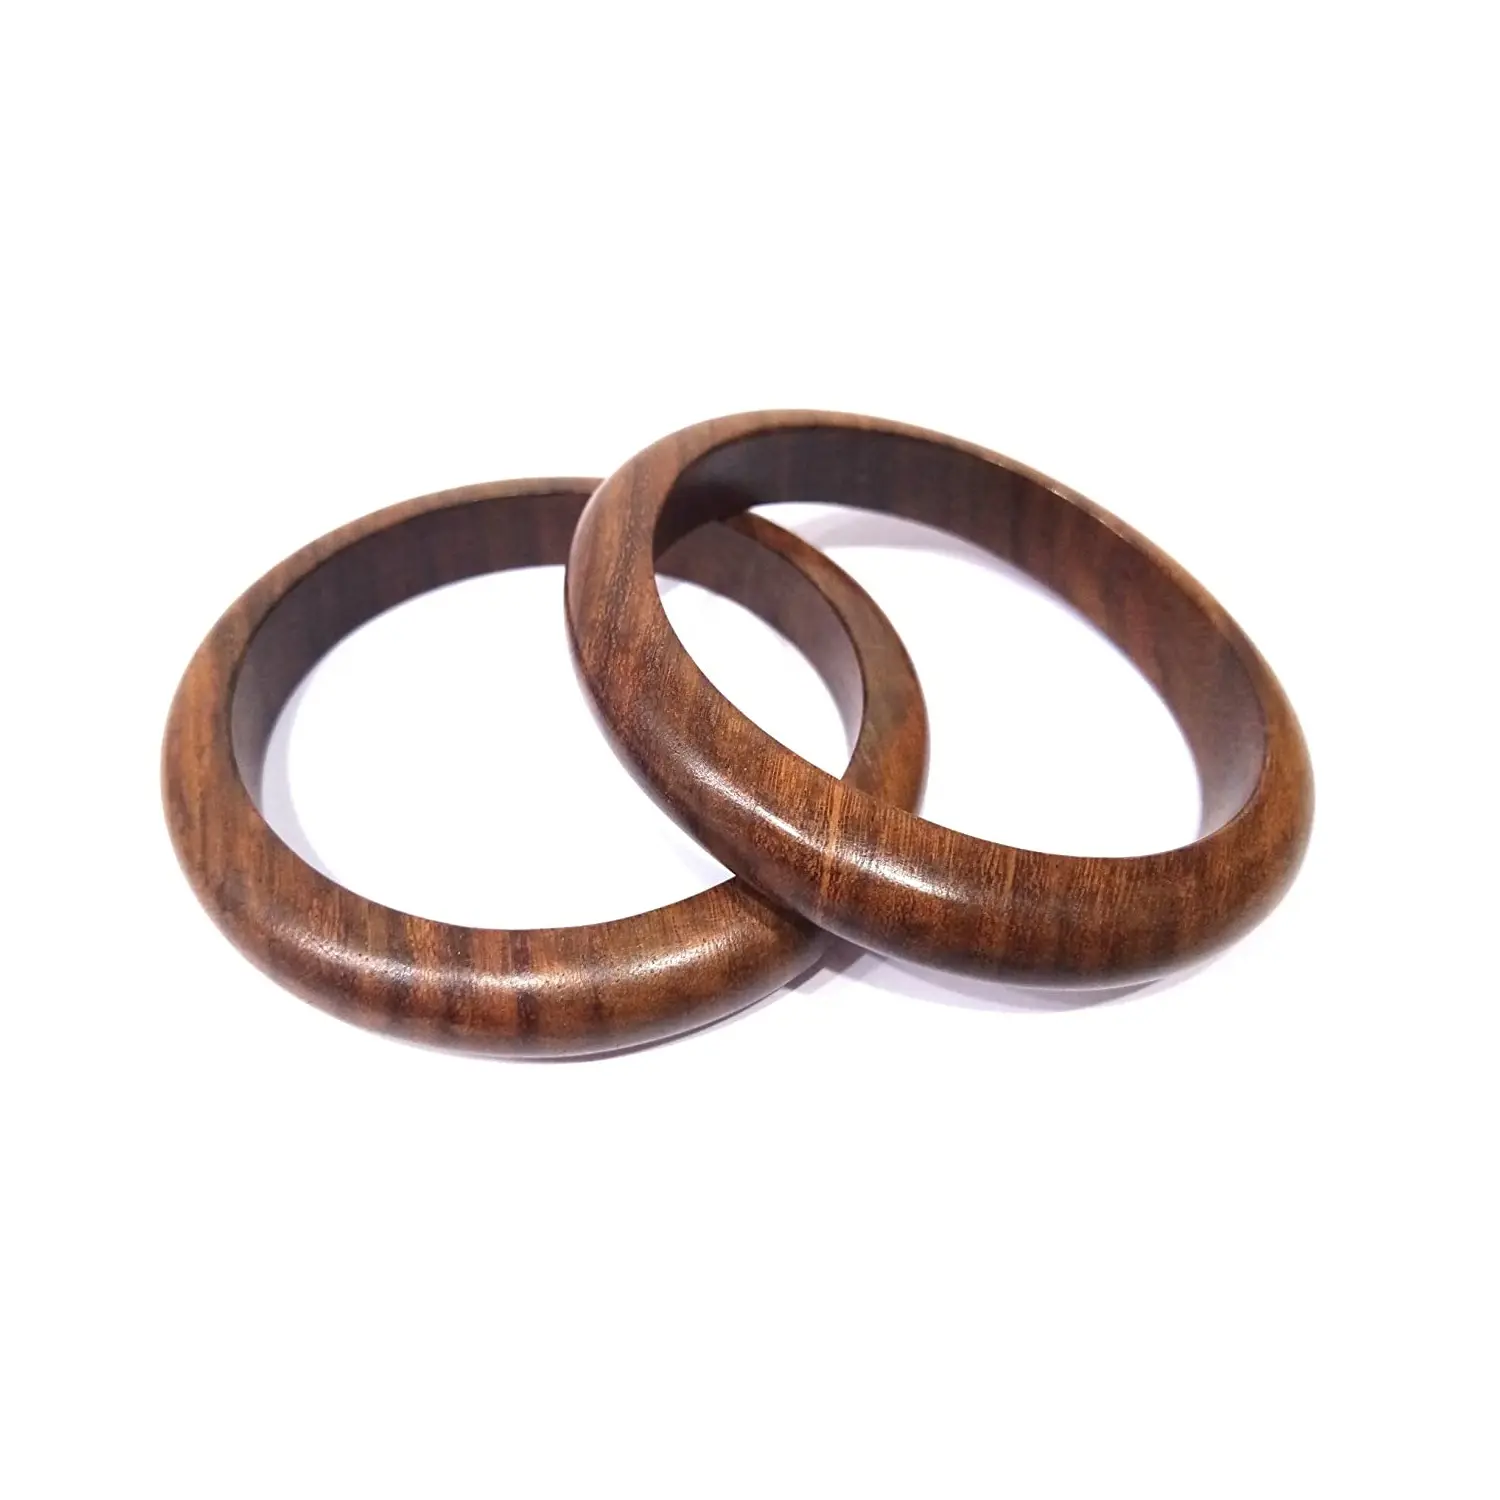 Plain Bangle & Bracelet With Wooden For Ladies Wedding Anniversary Bracelet & Bangle For Function Gifted Item Best Quality